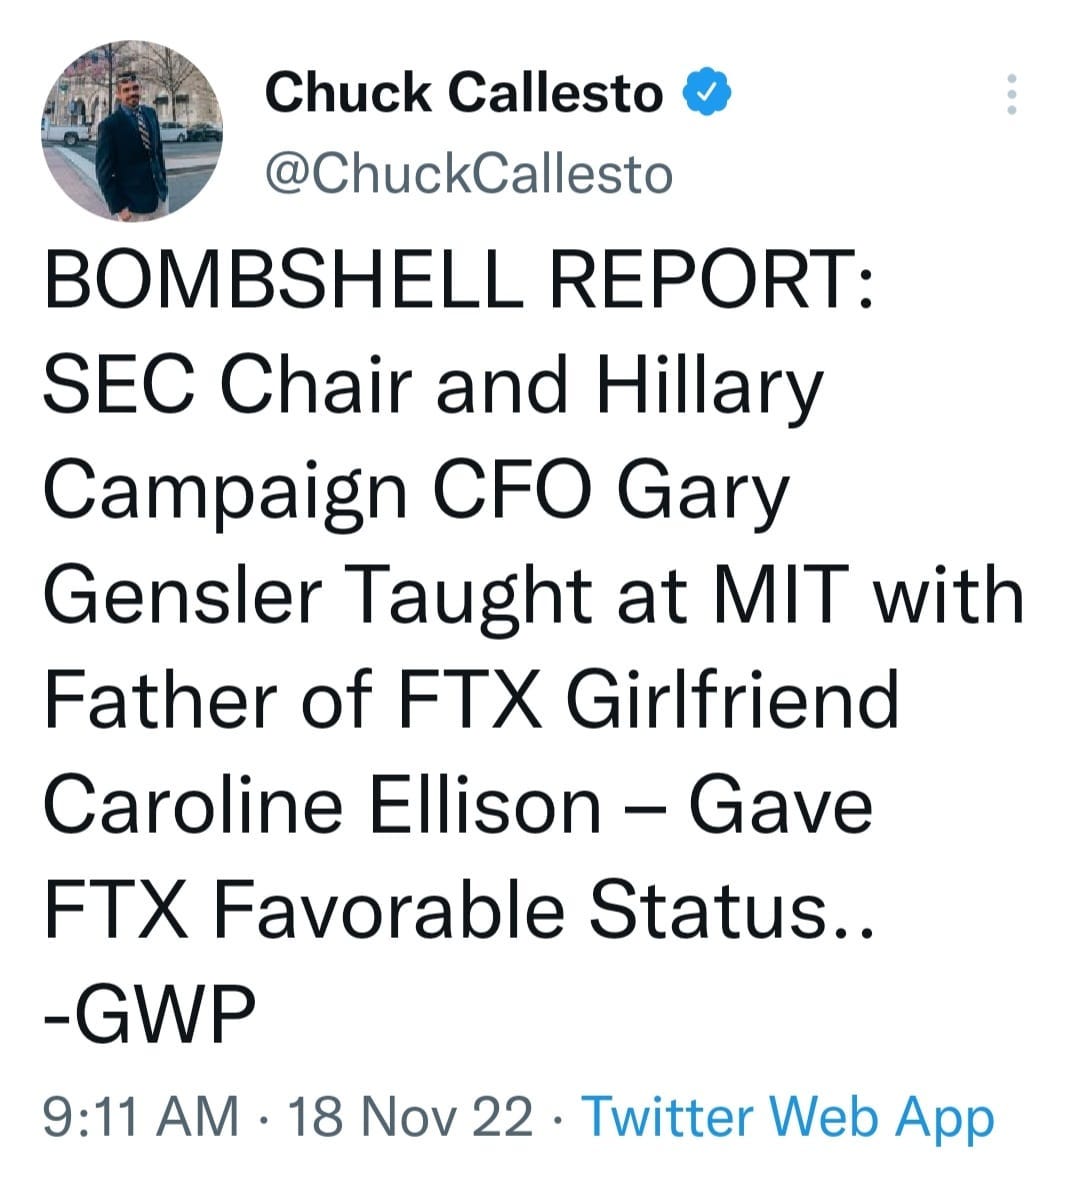 May be a Twitter screenshot of 1 person and text that says 'Chuck Callesto @ChuckCallesto BOMBSHELL REPORT: SEC Chair and Hillary Campaign CFO Gary Gensler Taught at MIT with Father of FTX Girlfriend Caroline Ellison Gave FTX Favorable Status.. -GWP 9:11 AM 18 Nov 22. Twitter Web App'